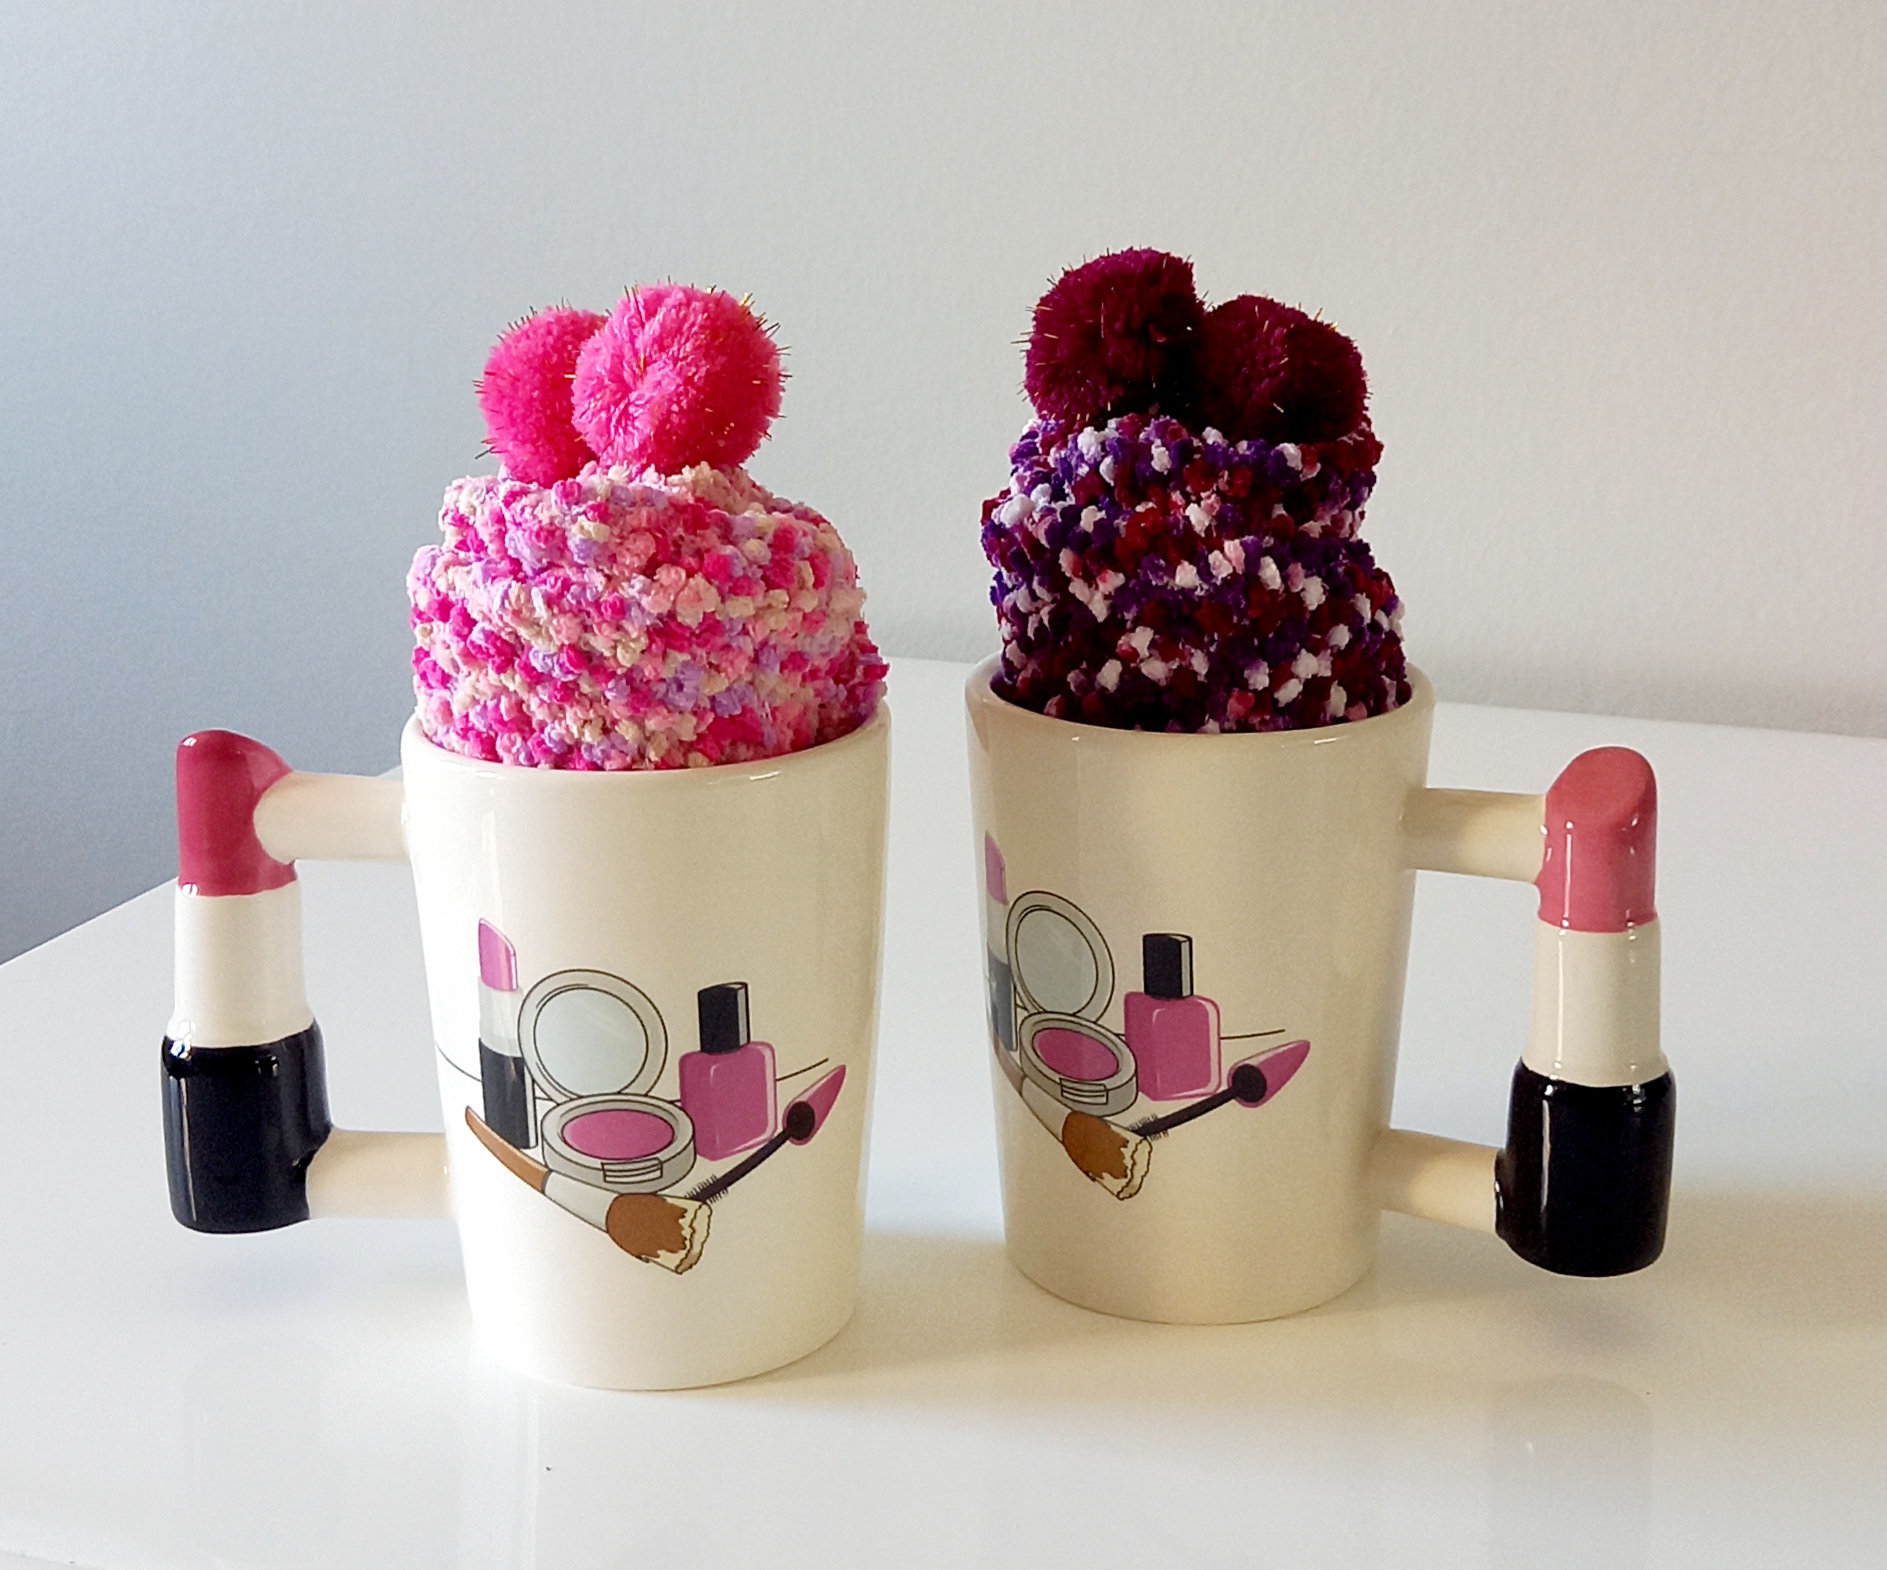 lipstick cup and socks